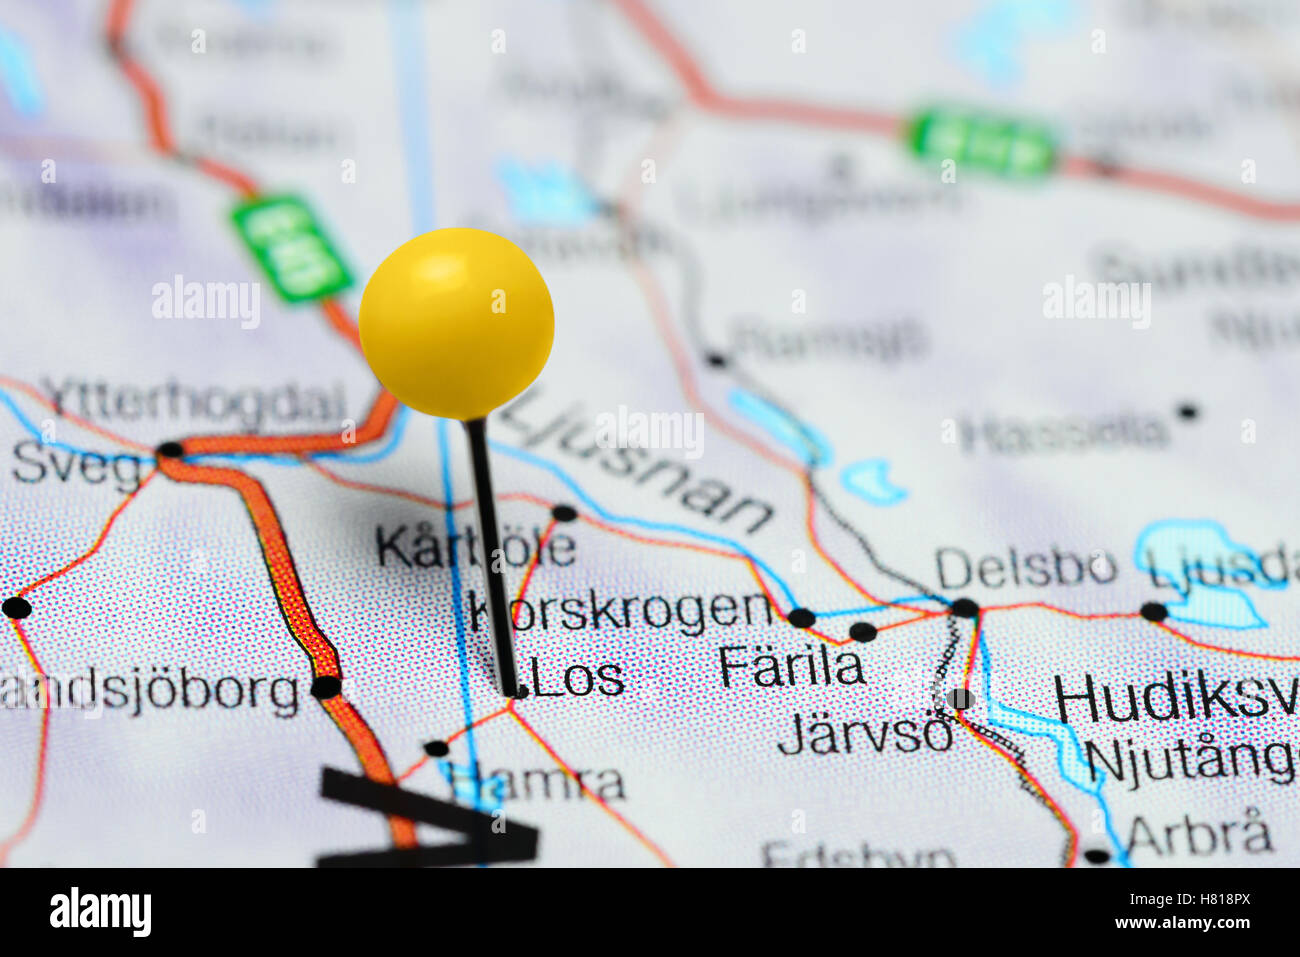 Los pinned on a map of Sweden Stock Photo